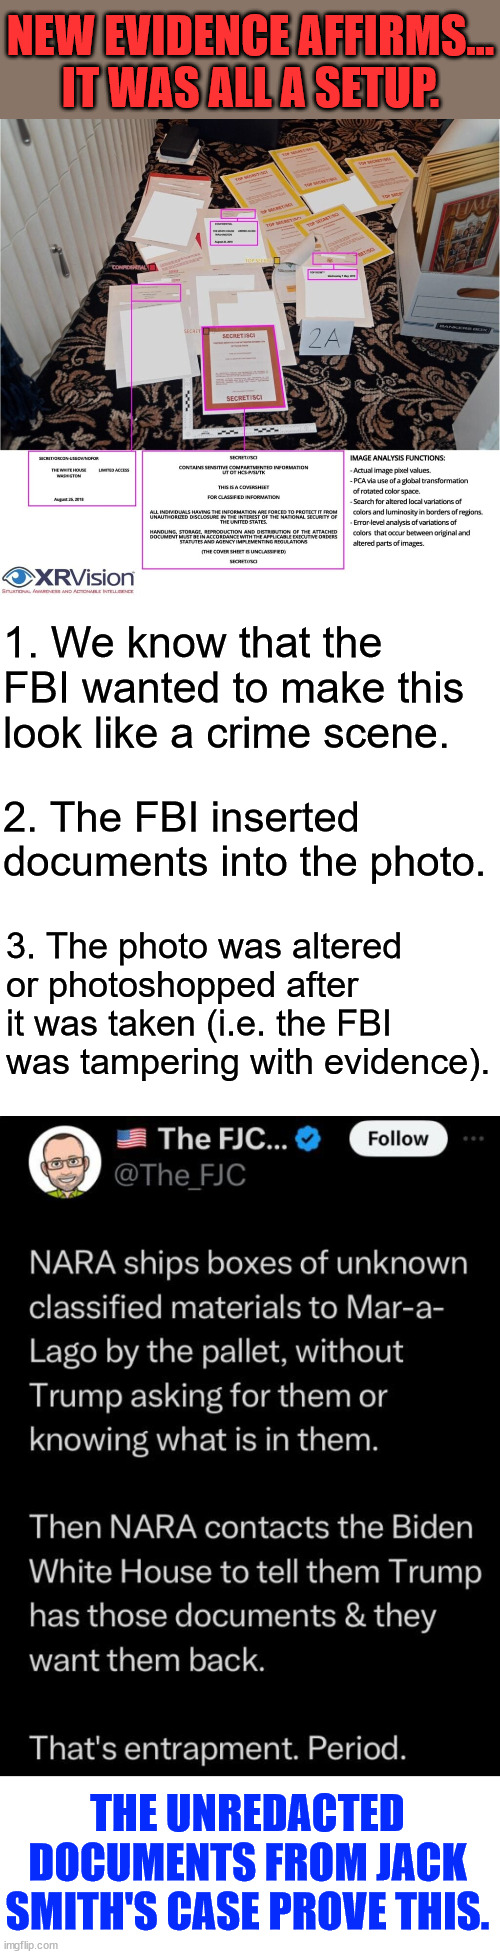 It was Joe Biden who ordered the FBI to raid Mar-a-Lago | NEW EVIDENCE AFFIRMS... IT WAS ALL A SETUP. 1. We know that the FBI wanted to make this look like a crime scene. 2. The FBI inserted documents into the photo. 3. The photo was altered 
or photoshopped after it was taken (i.e. the FBI was tampering with evidence). THE UNREDACTED DOCUMENTS FROM JACK SMITH'S CASE PROVE THIS. | image tagged in crooked biden fbi doj,exposed,tried to frame trump,no wonder why jack smith wanted evidence sealed | made w/ Imgflip meme maker